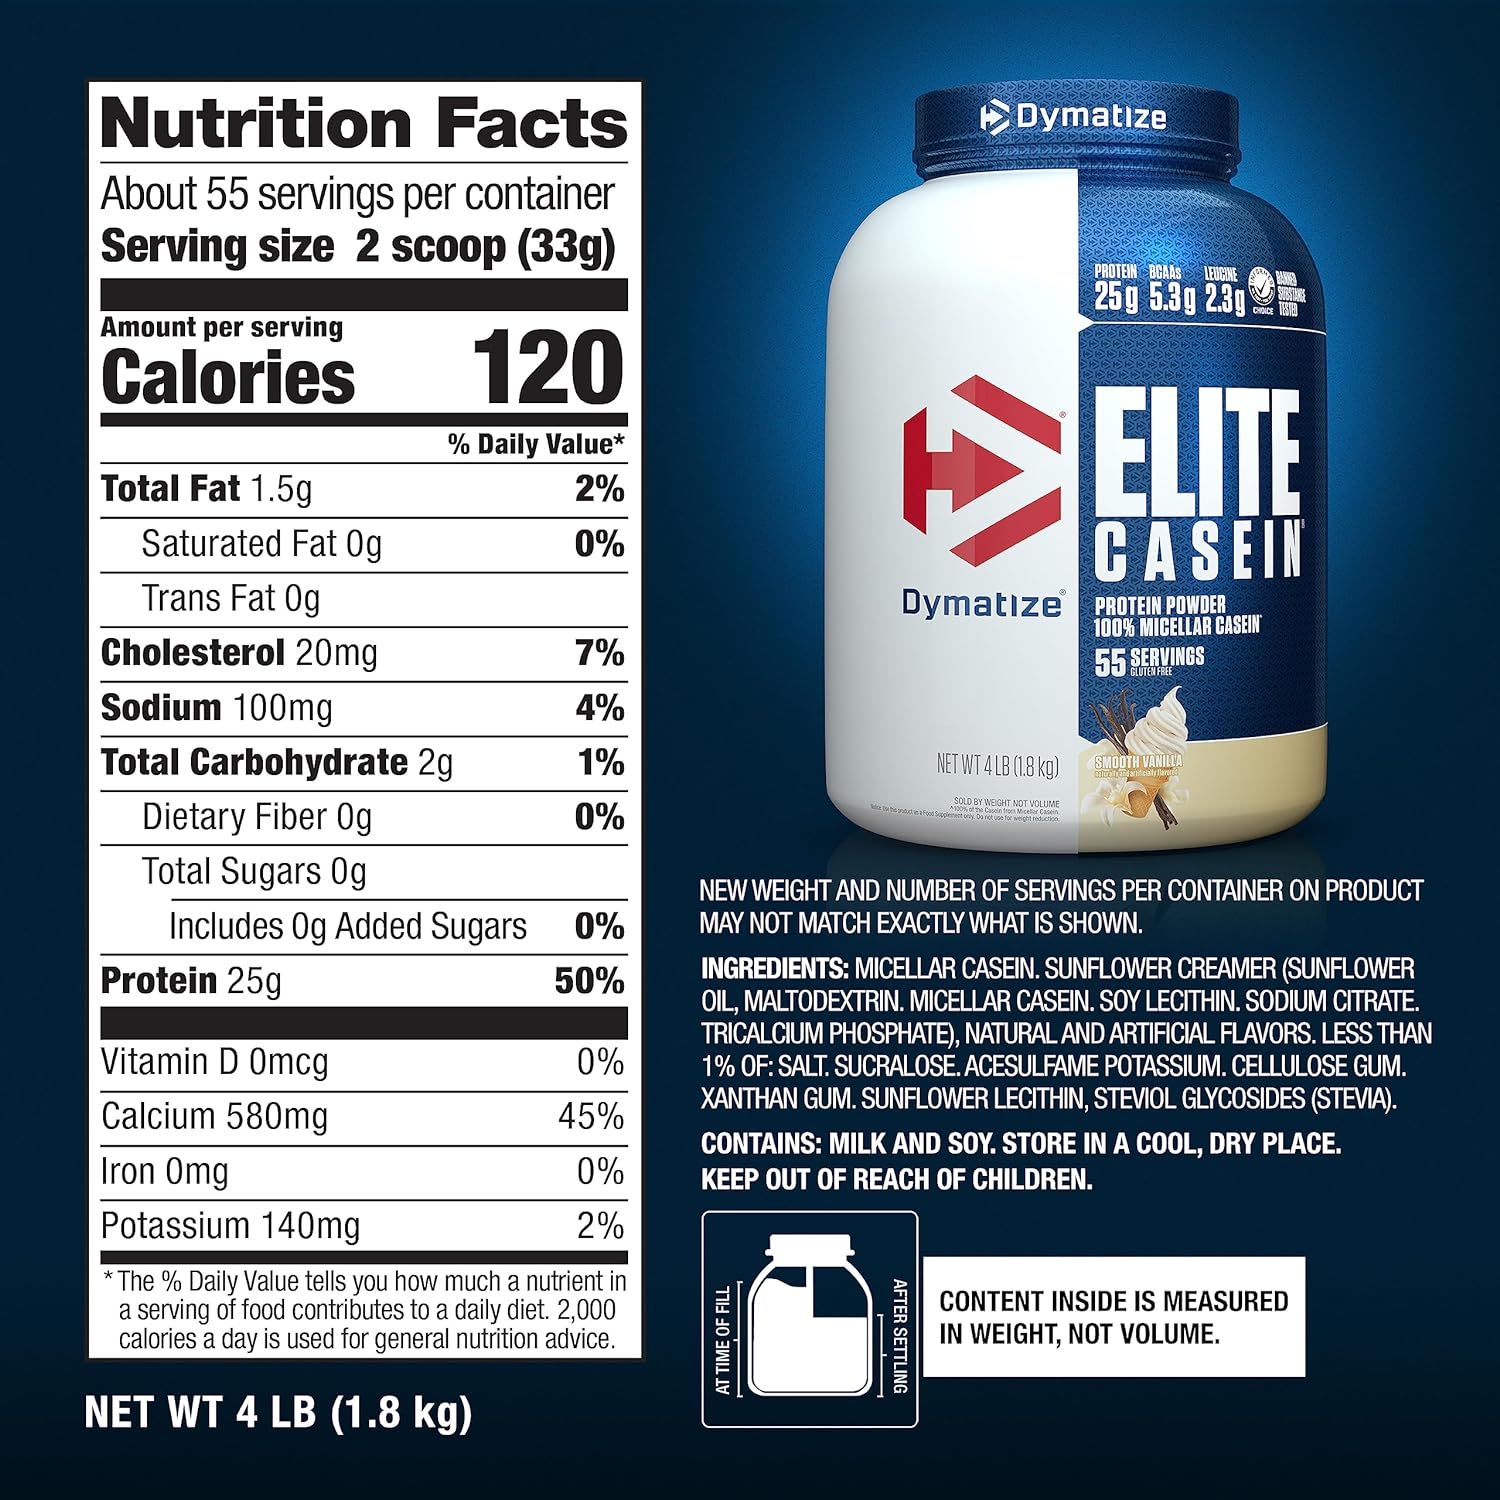 Dymatize Elite Casein Protein Powder, Slow Absorbing with Muscle Build